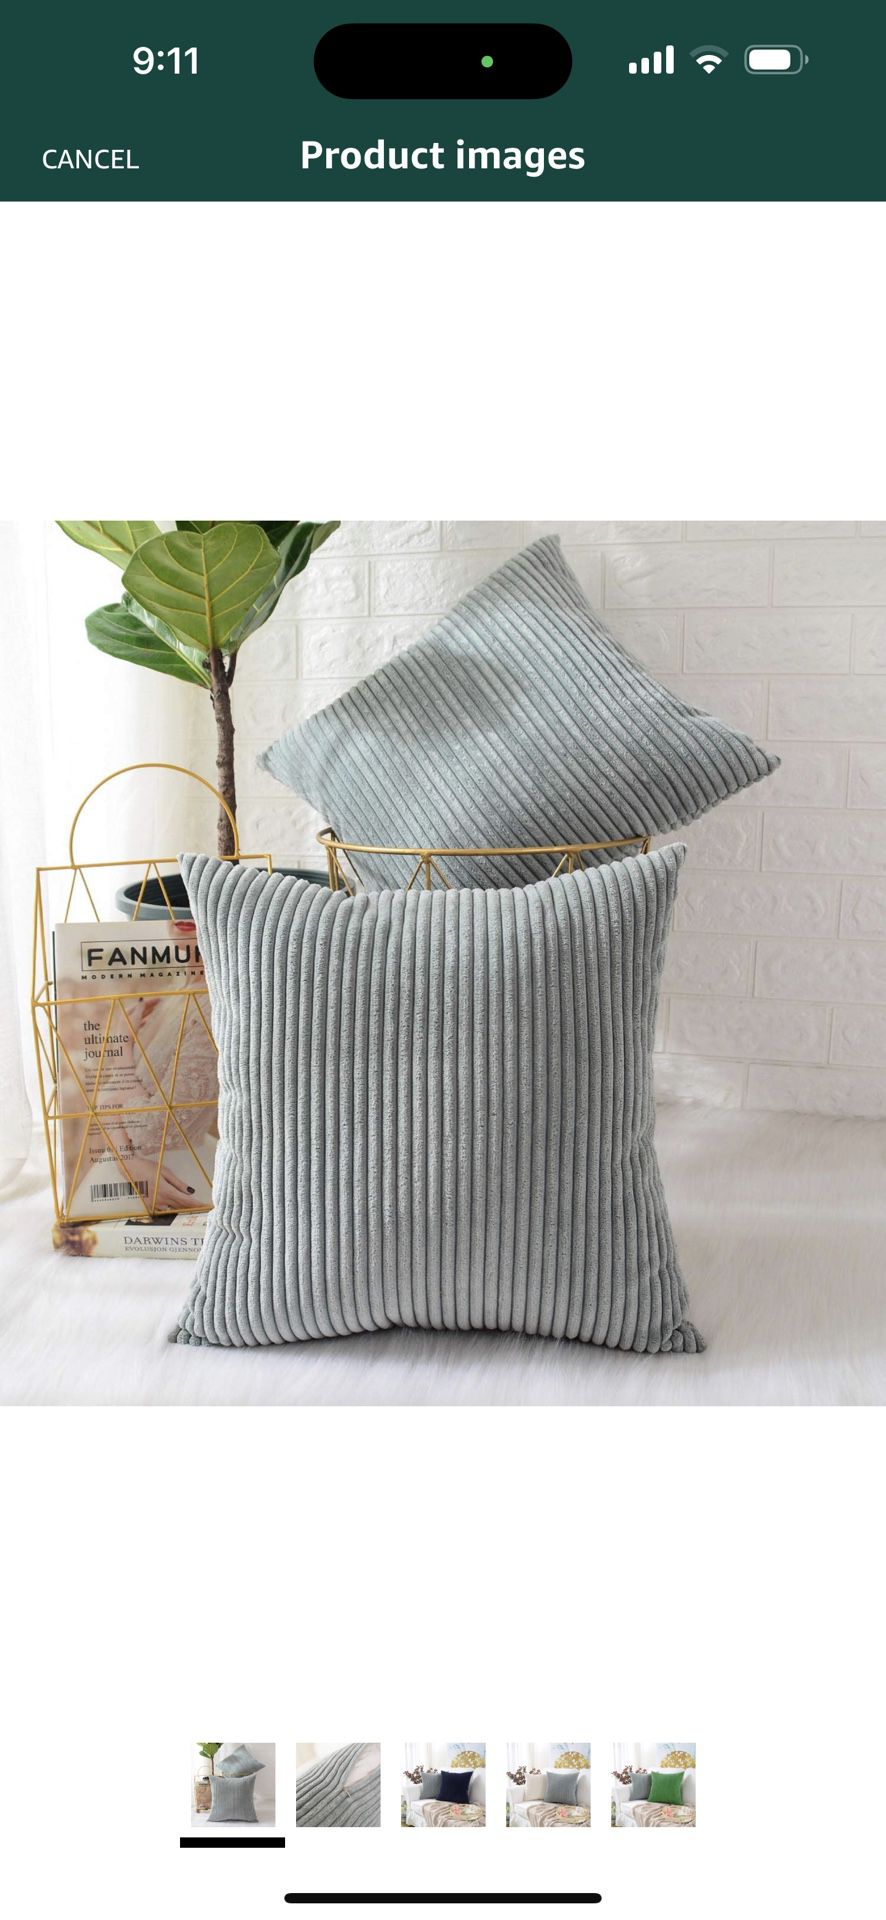 Pack of 2, Corduroy Soft Decorative Square Throw Pillow Cover Cushion Covers Pillowcase, Home Decor Decorations for Sofa Couch Bed Chair 26x26 Inch/65